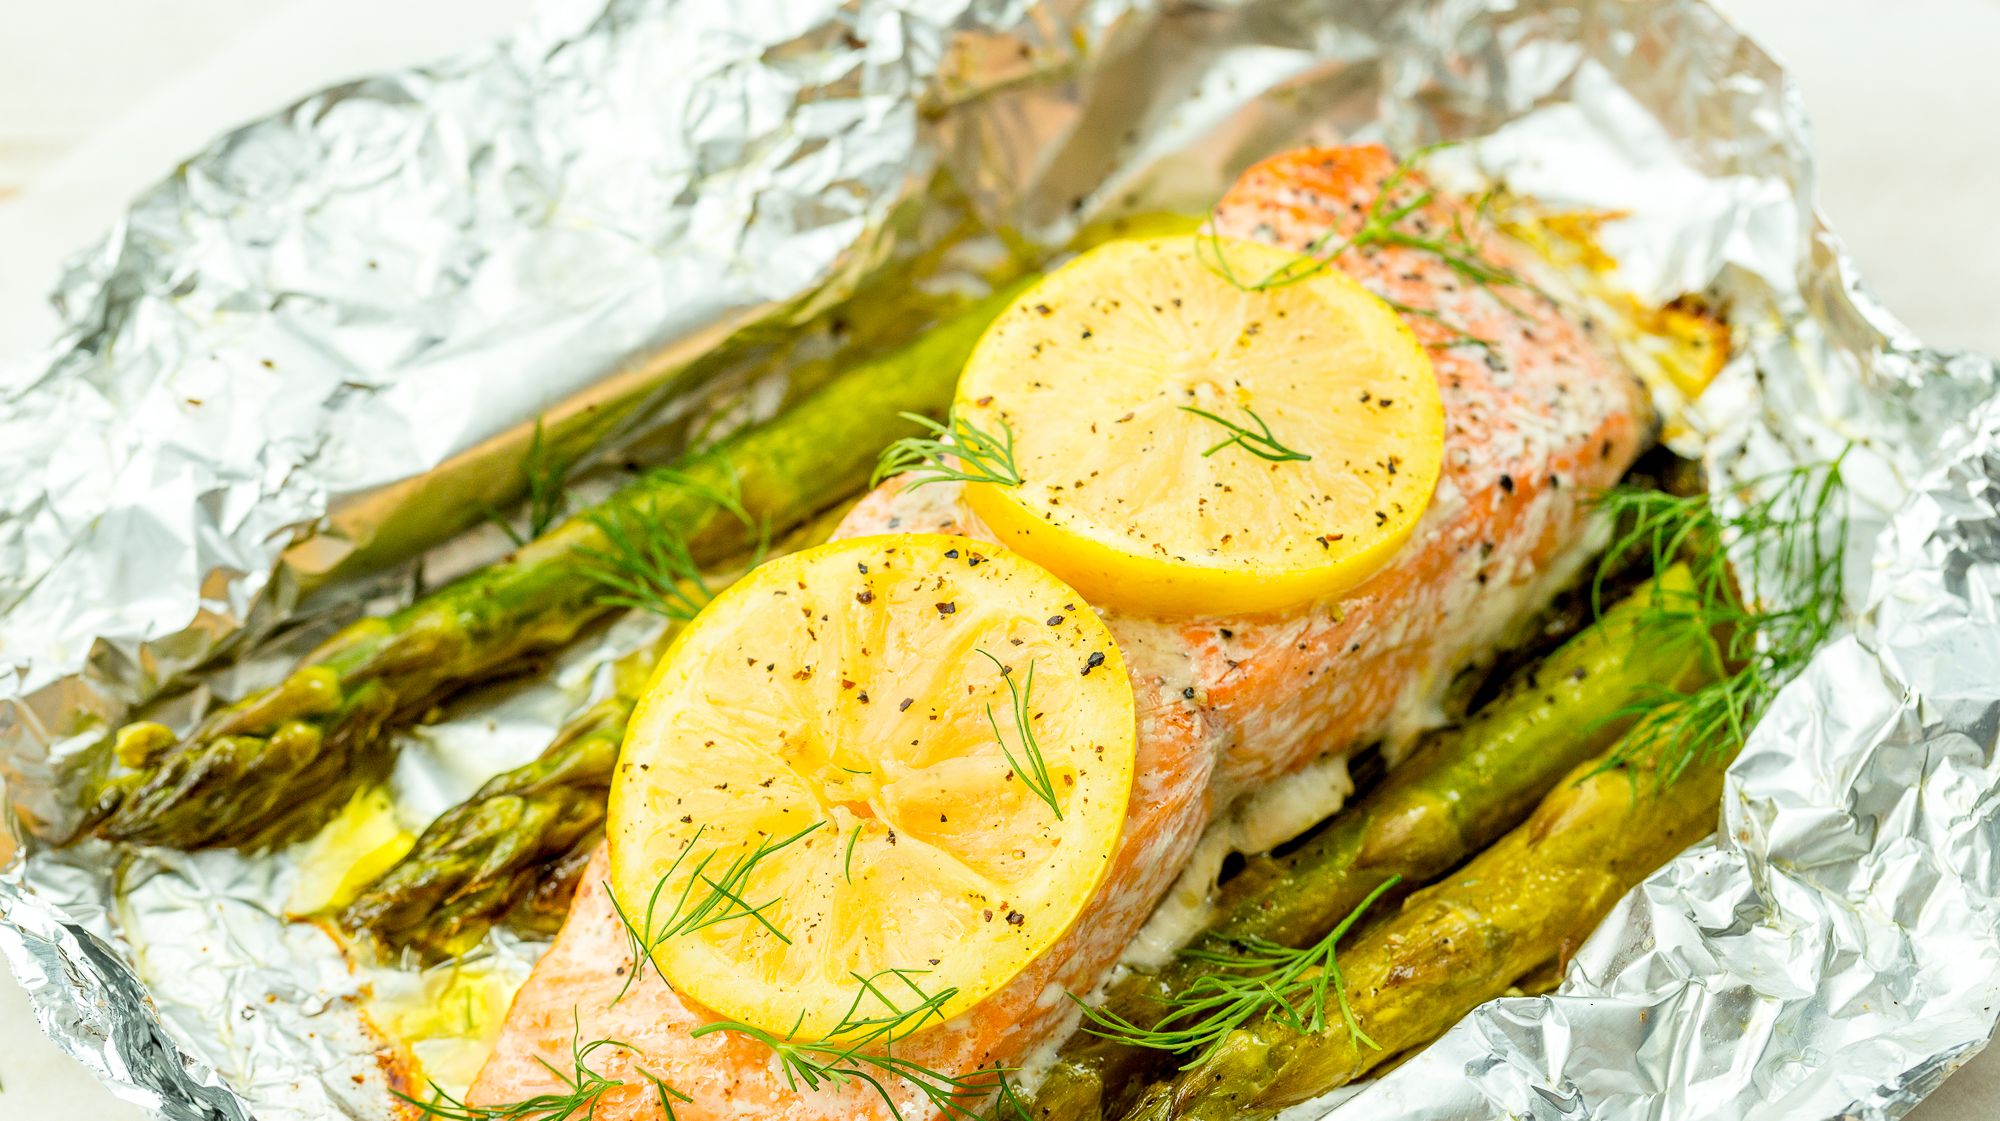 https://hips.hearstapps.com/delish/assets/16/21/1464200367-delish-grilled-salmon-foil-pack.jpg?crop=1.00xw:0.841xh;0,0.115xh